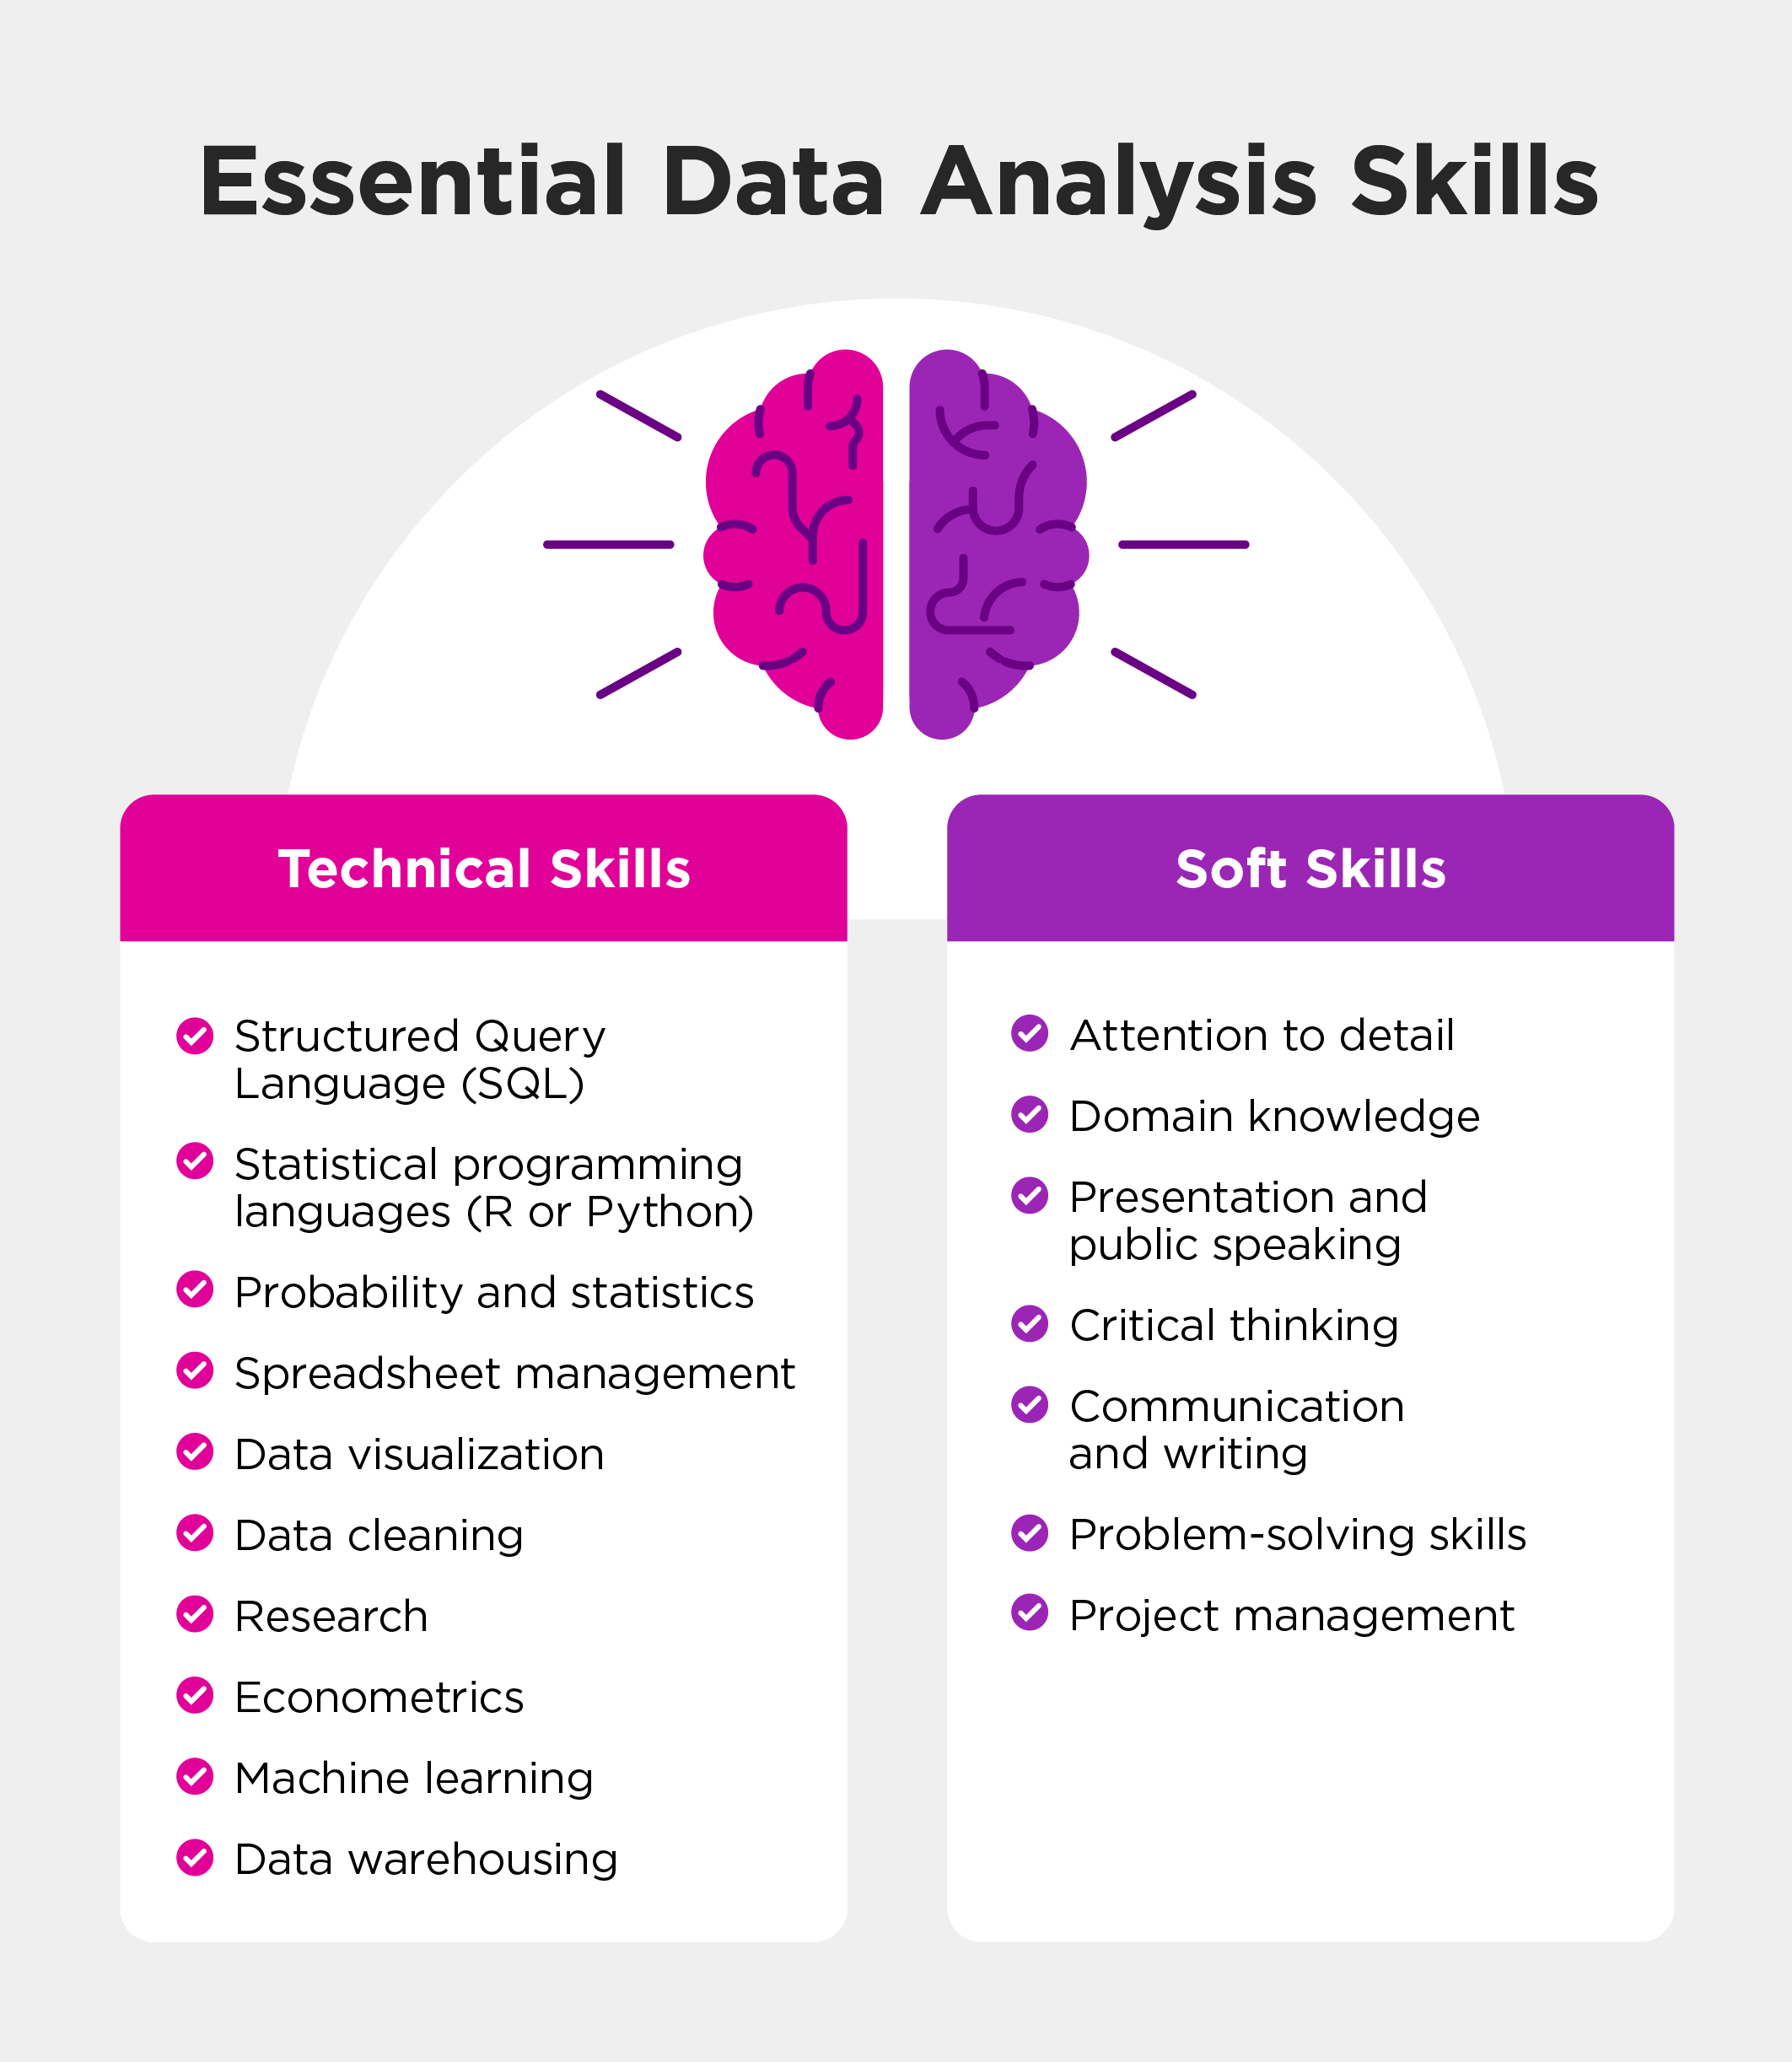 Image recaps technical and soft skills for data analysis.